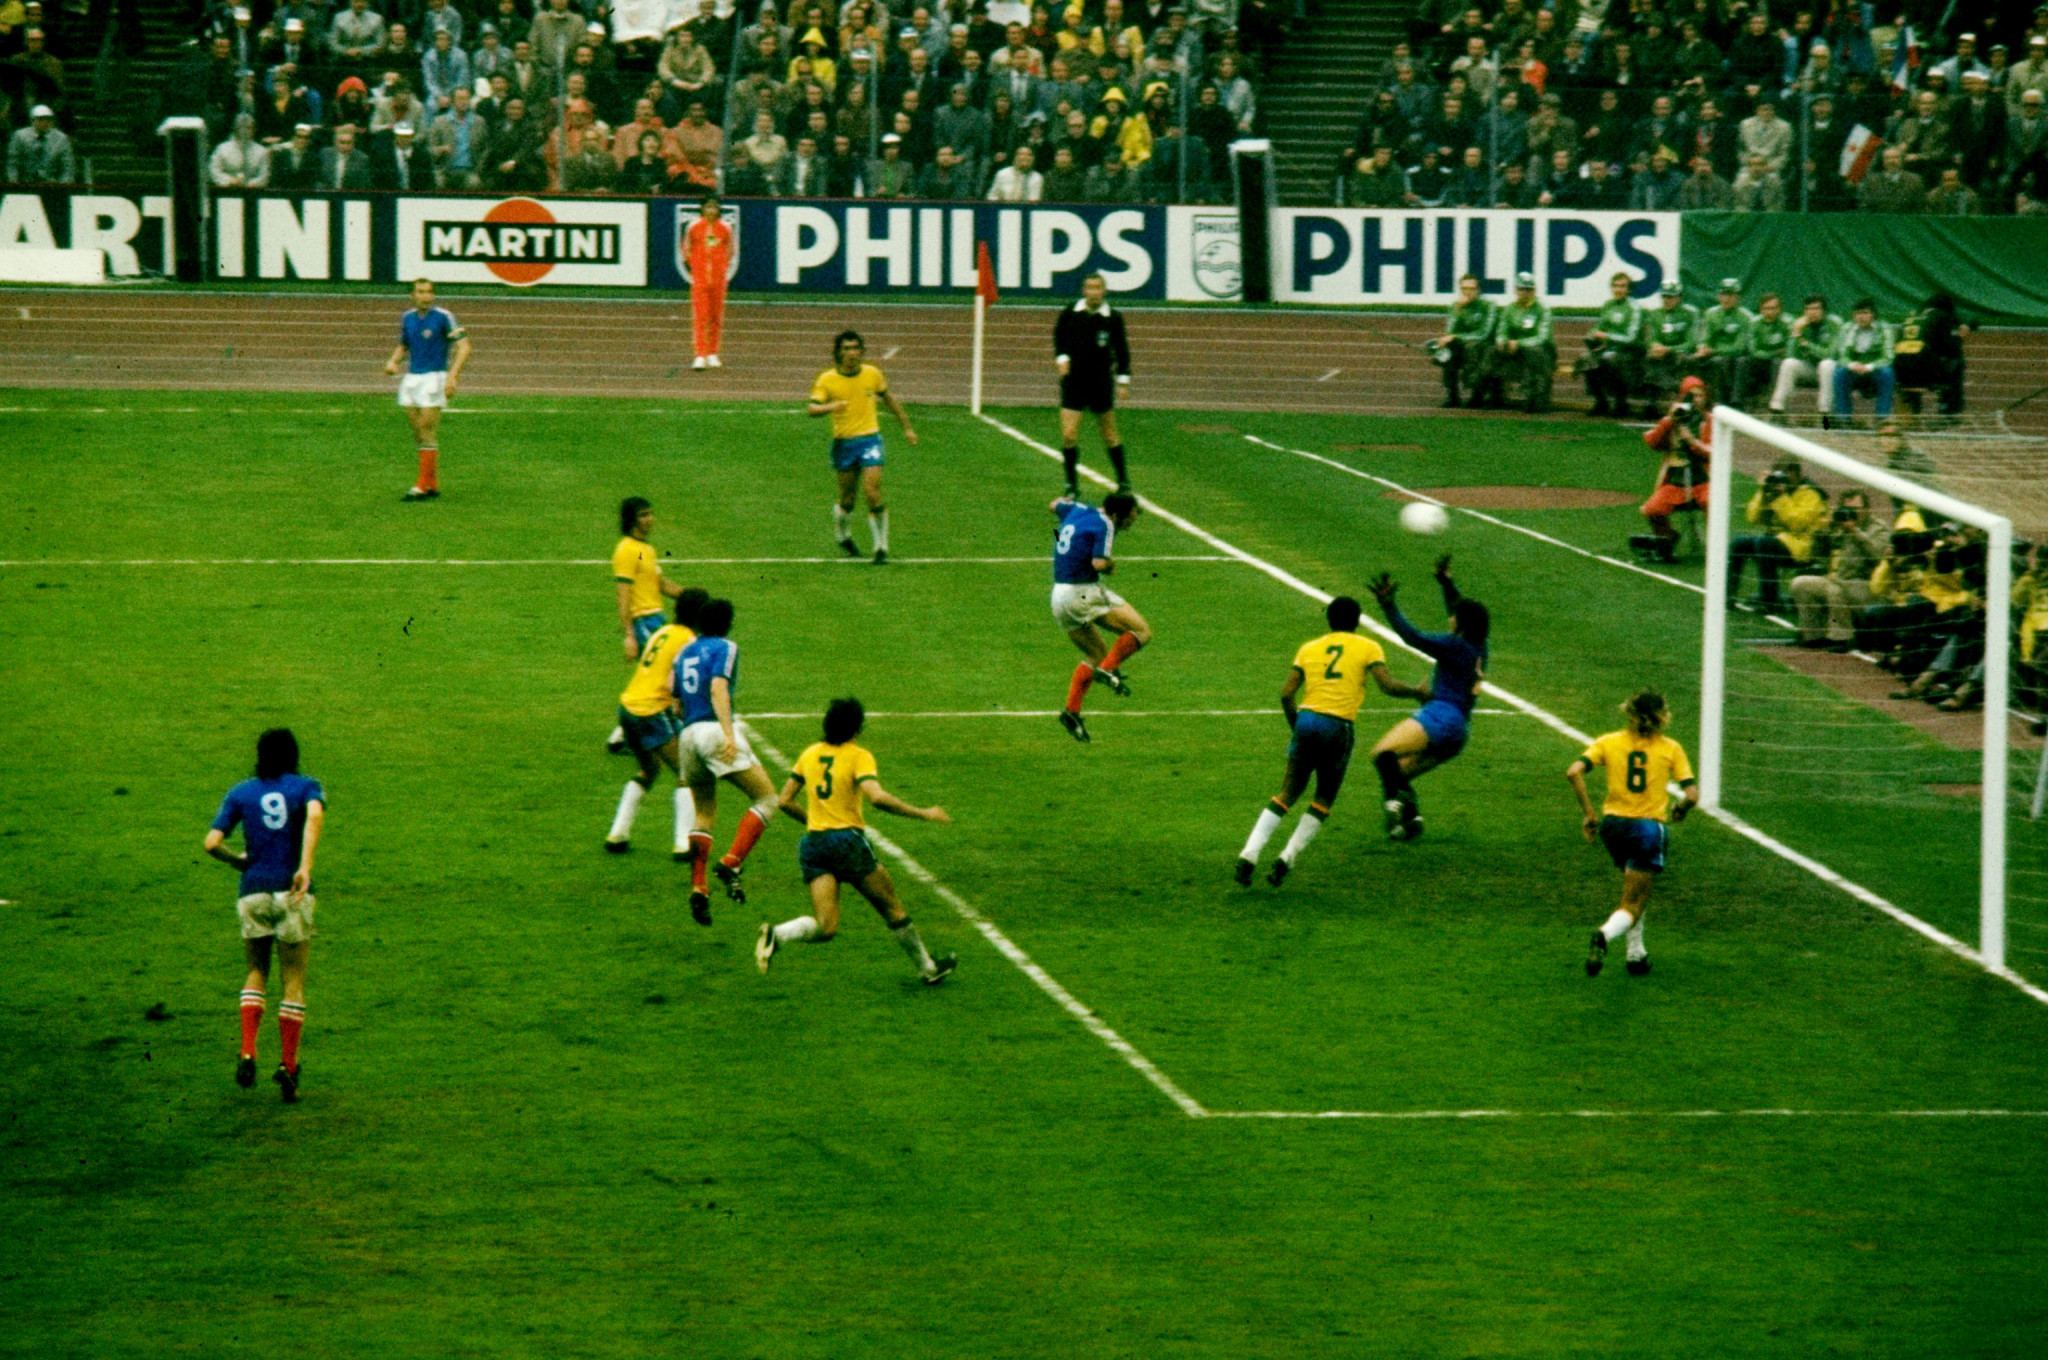 The opening match in 1974 featured Brazil, winners of the 1970 tournament, playing in yellow shirts, in a 0-0 draw against Yugoslavia ©Getty Images